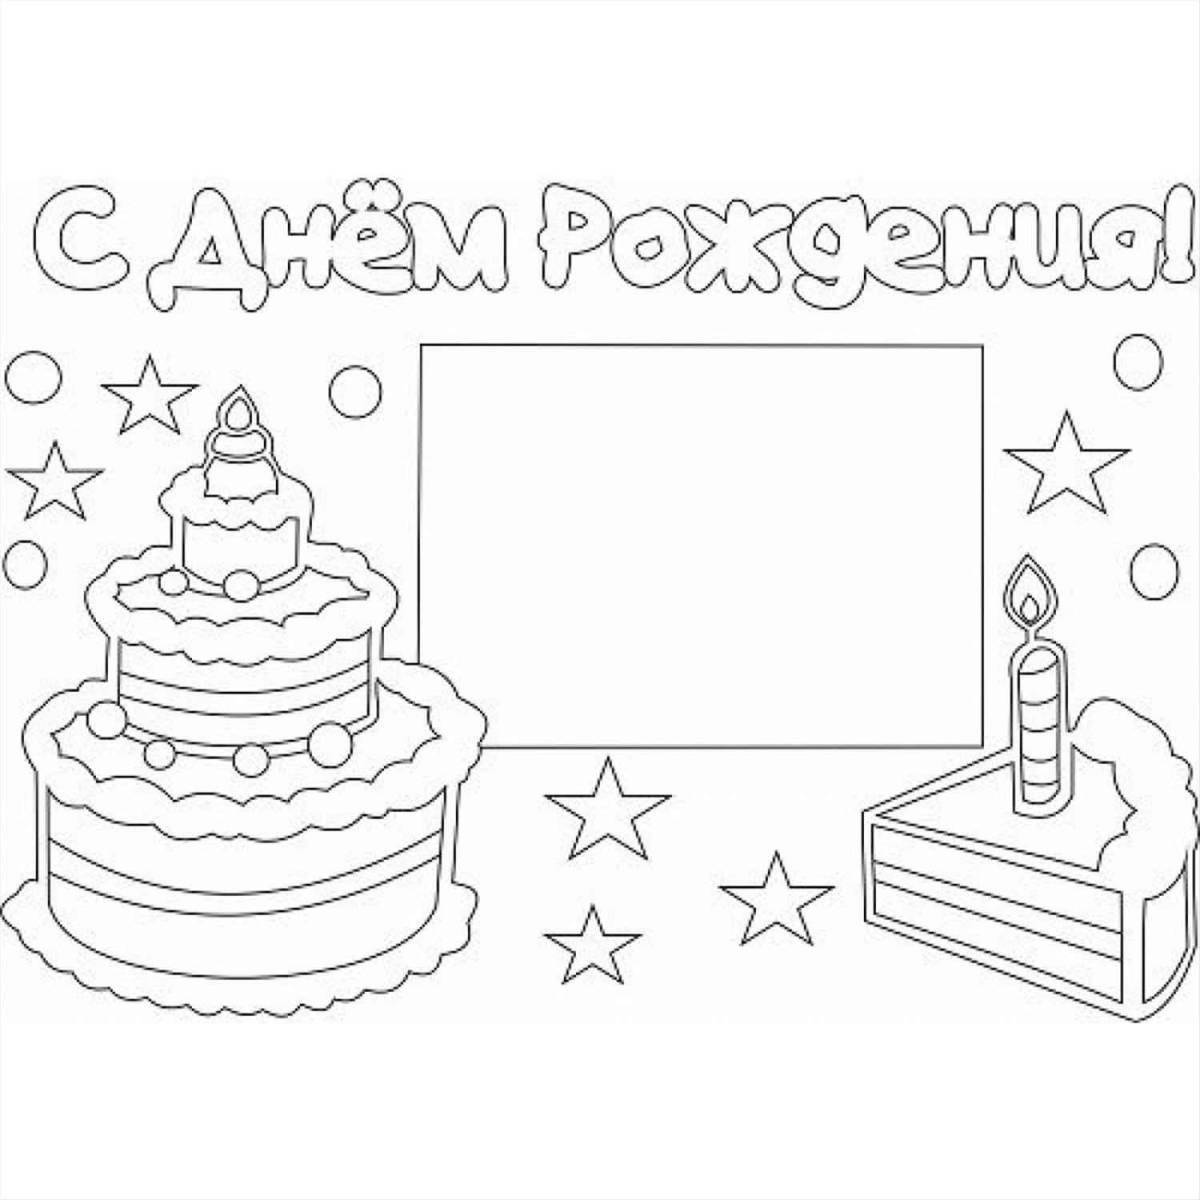 Charming happy birthday coloring book